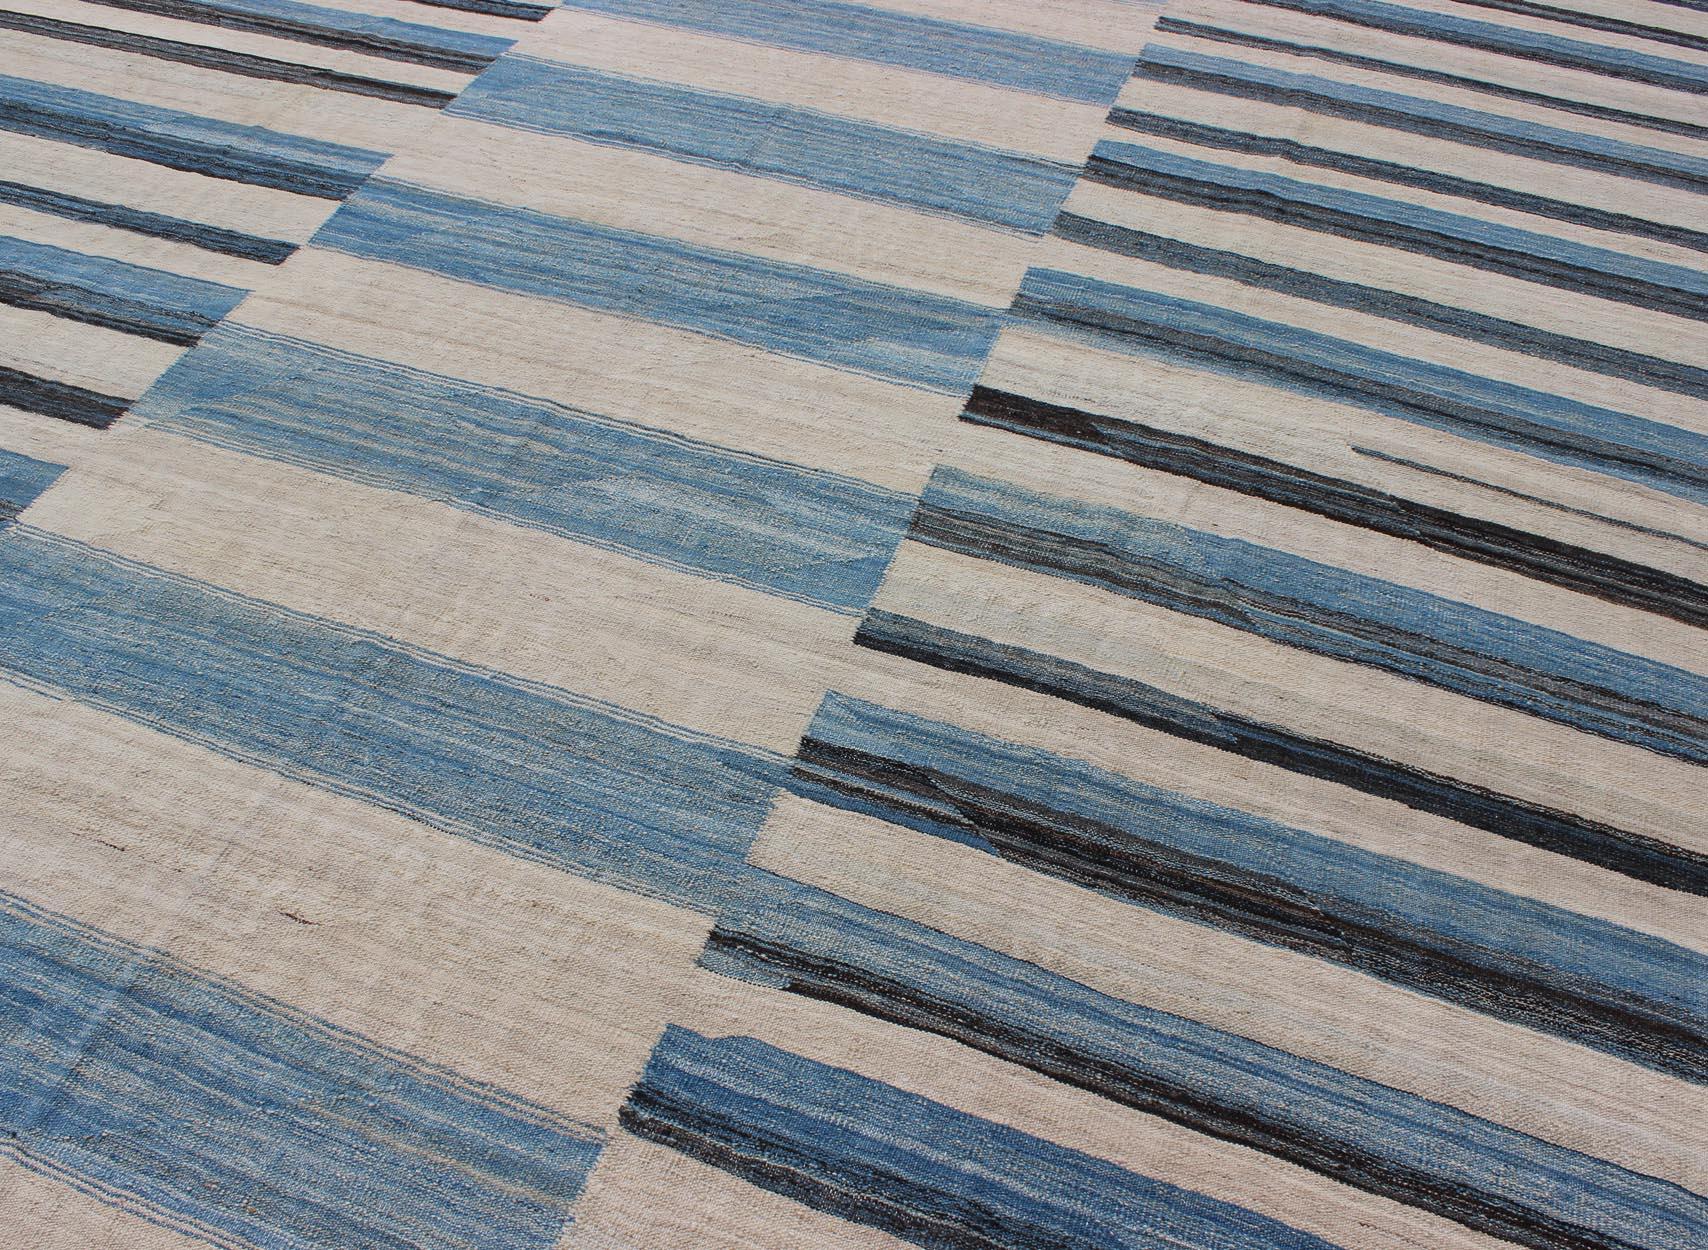 Contemporary Flat-Weave Kilim Rug with Classic Stripe Design in Blue, Ivory, Charcoal